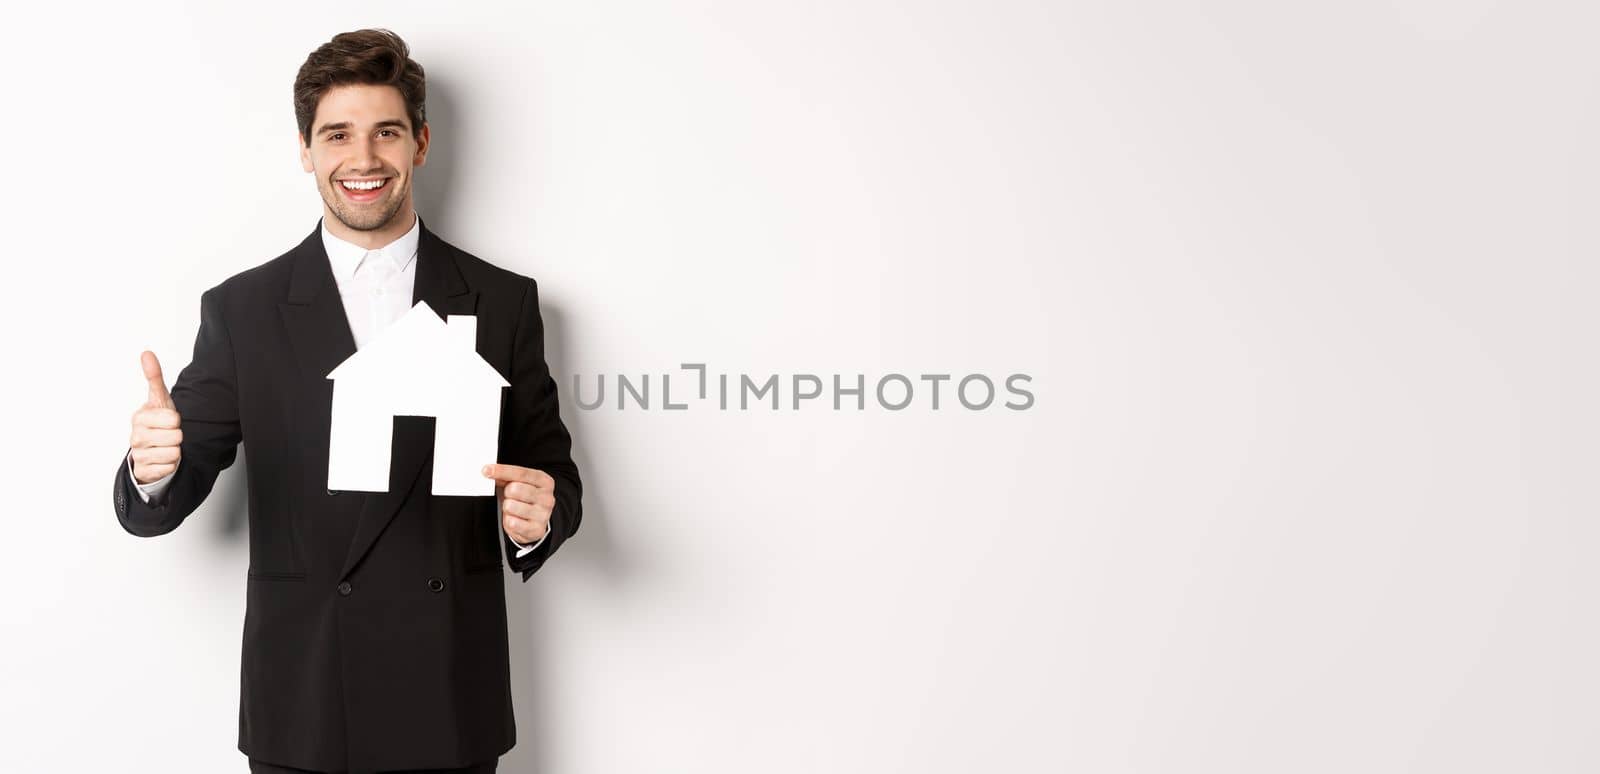 Portrait of confident real estate agent showing house maket and thumb-up, standing against white background.